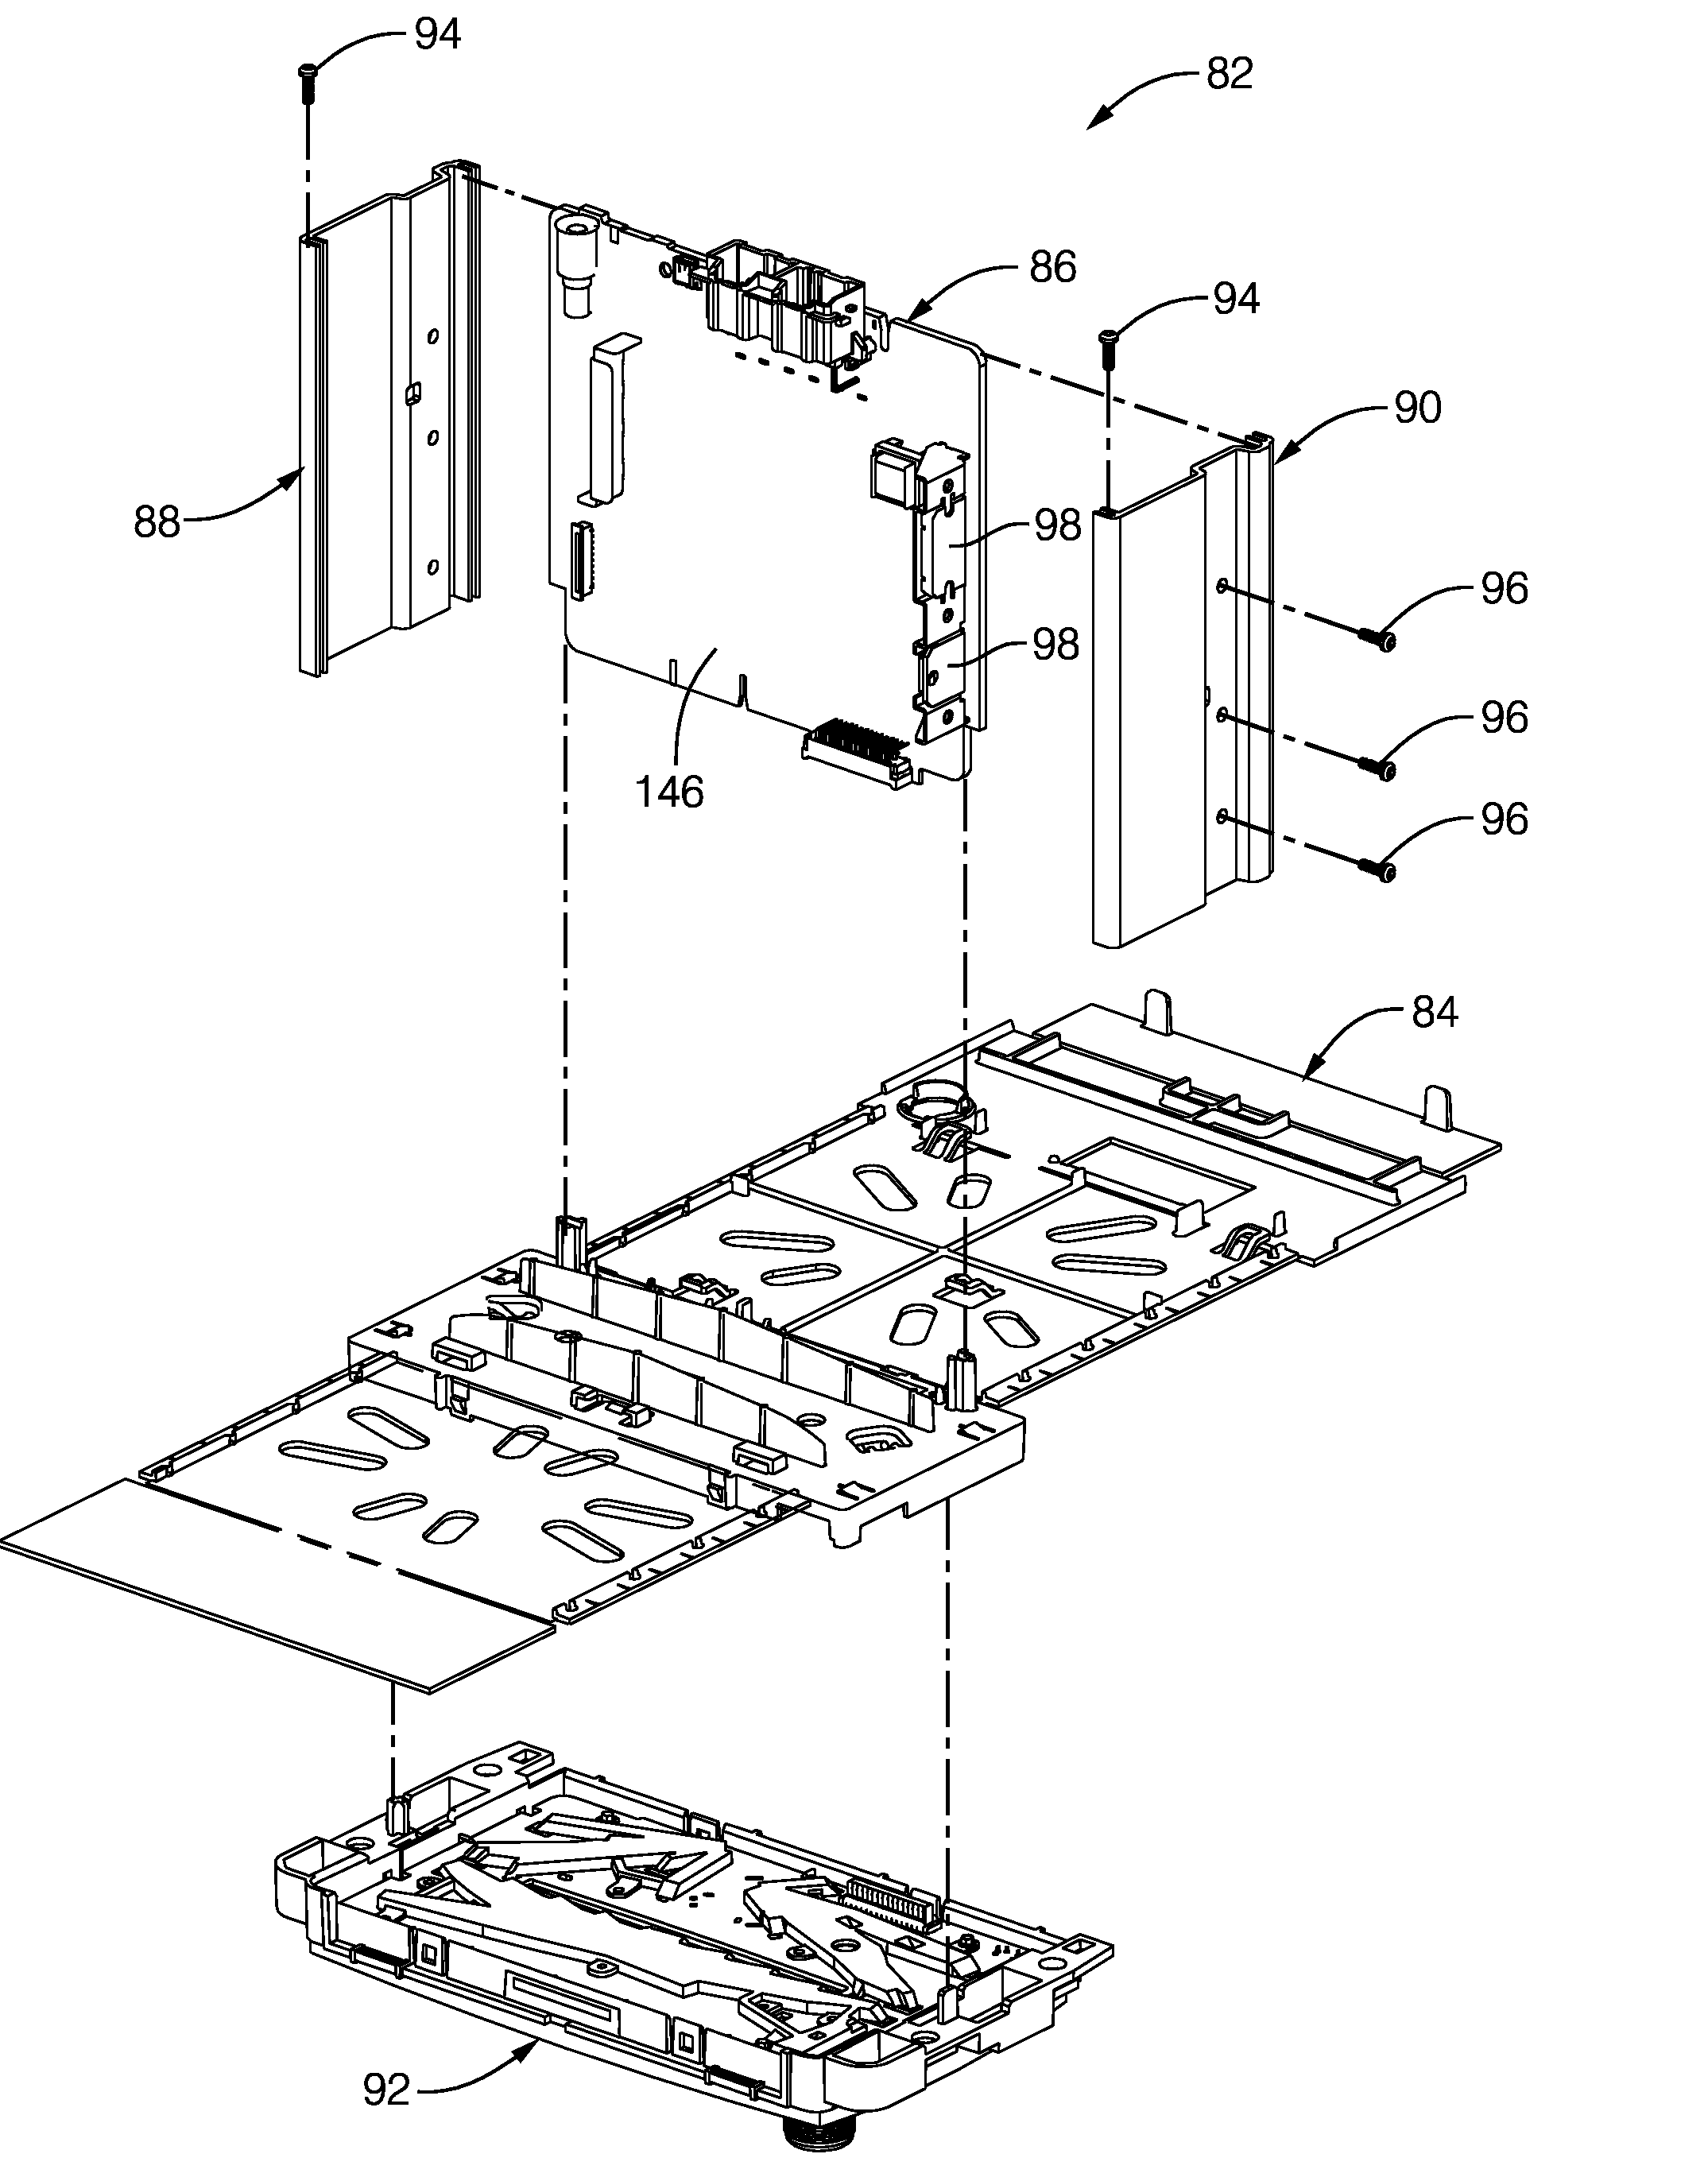 Lightweight electrical assembly with enhanced electromagnetic shielding